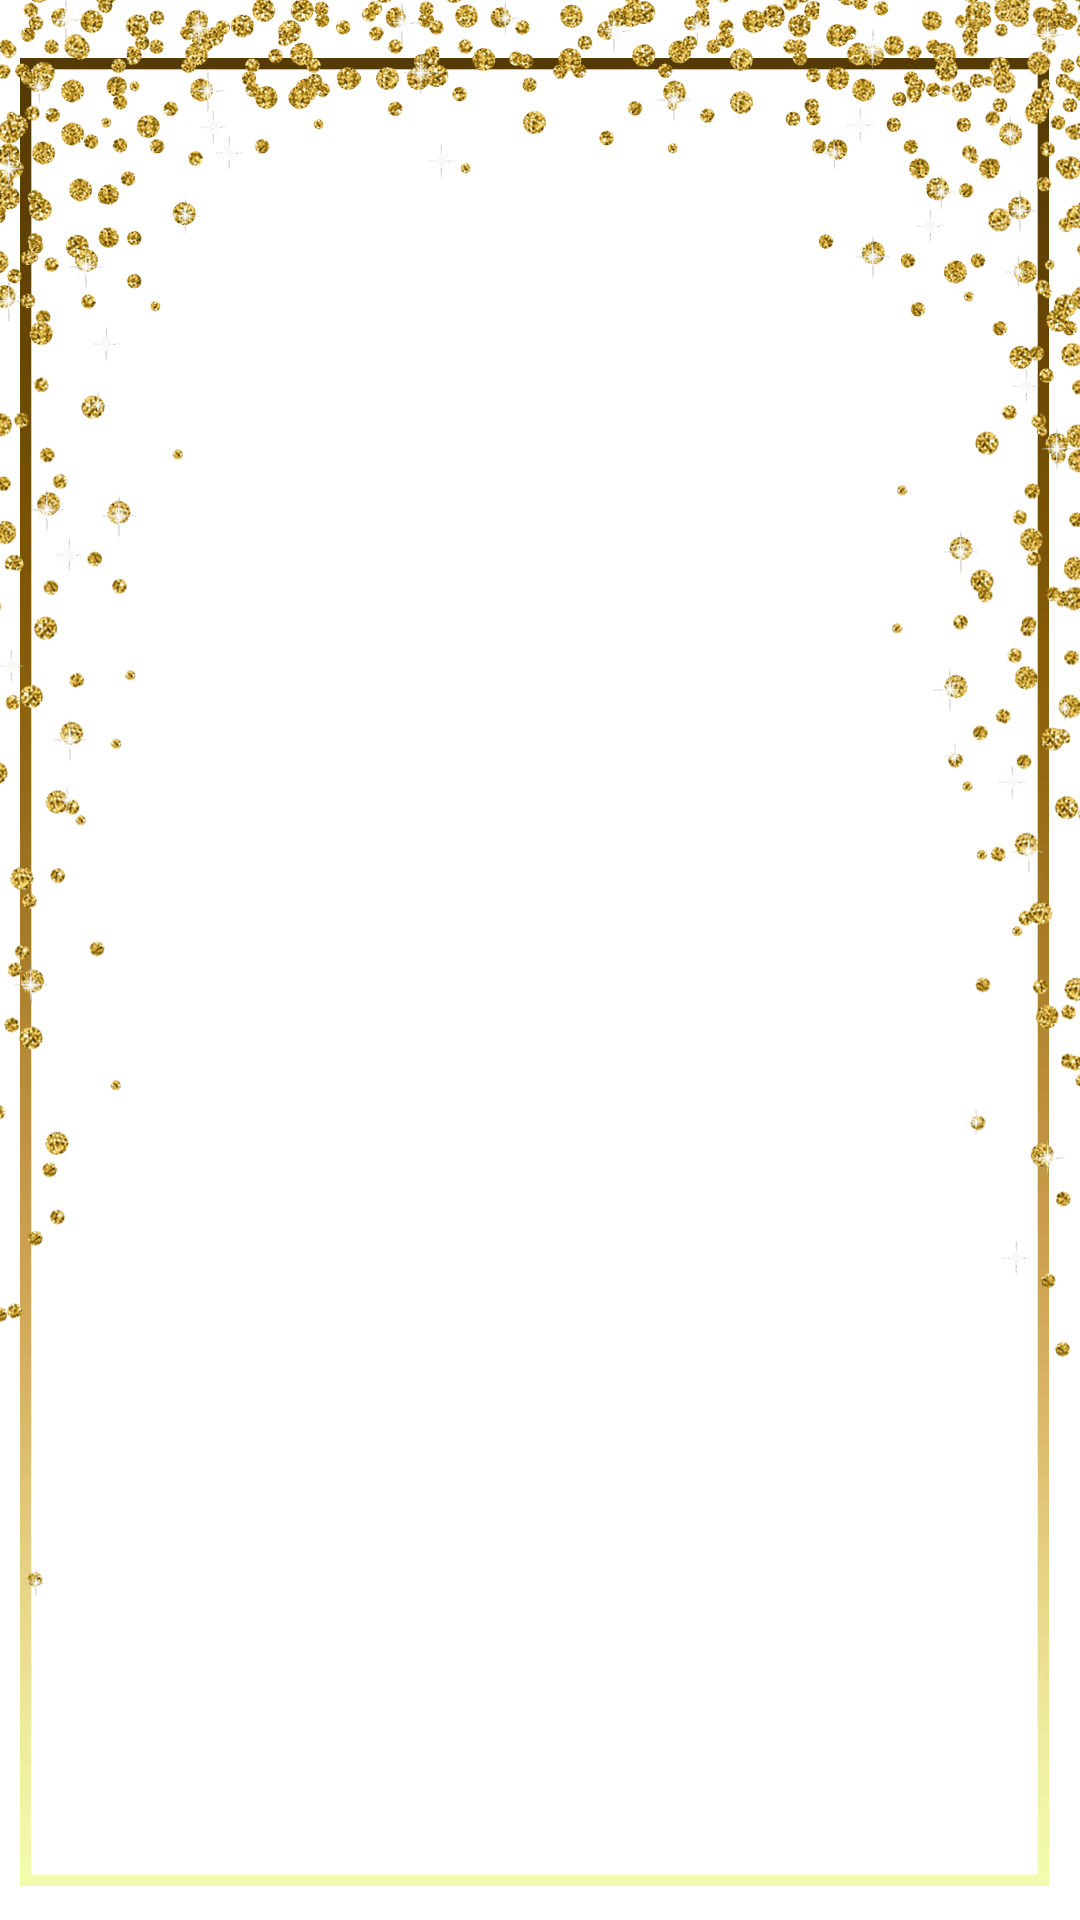 Free Gold Confetti Border Png, Download Free Gold Confetti Border Png